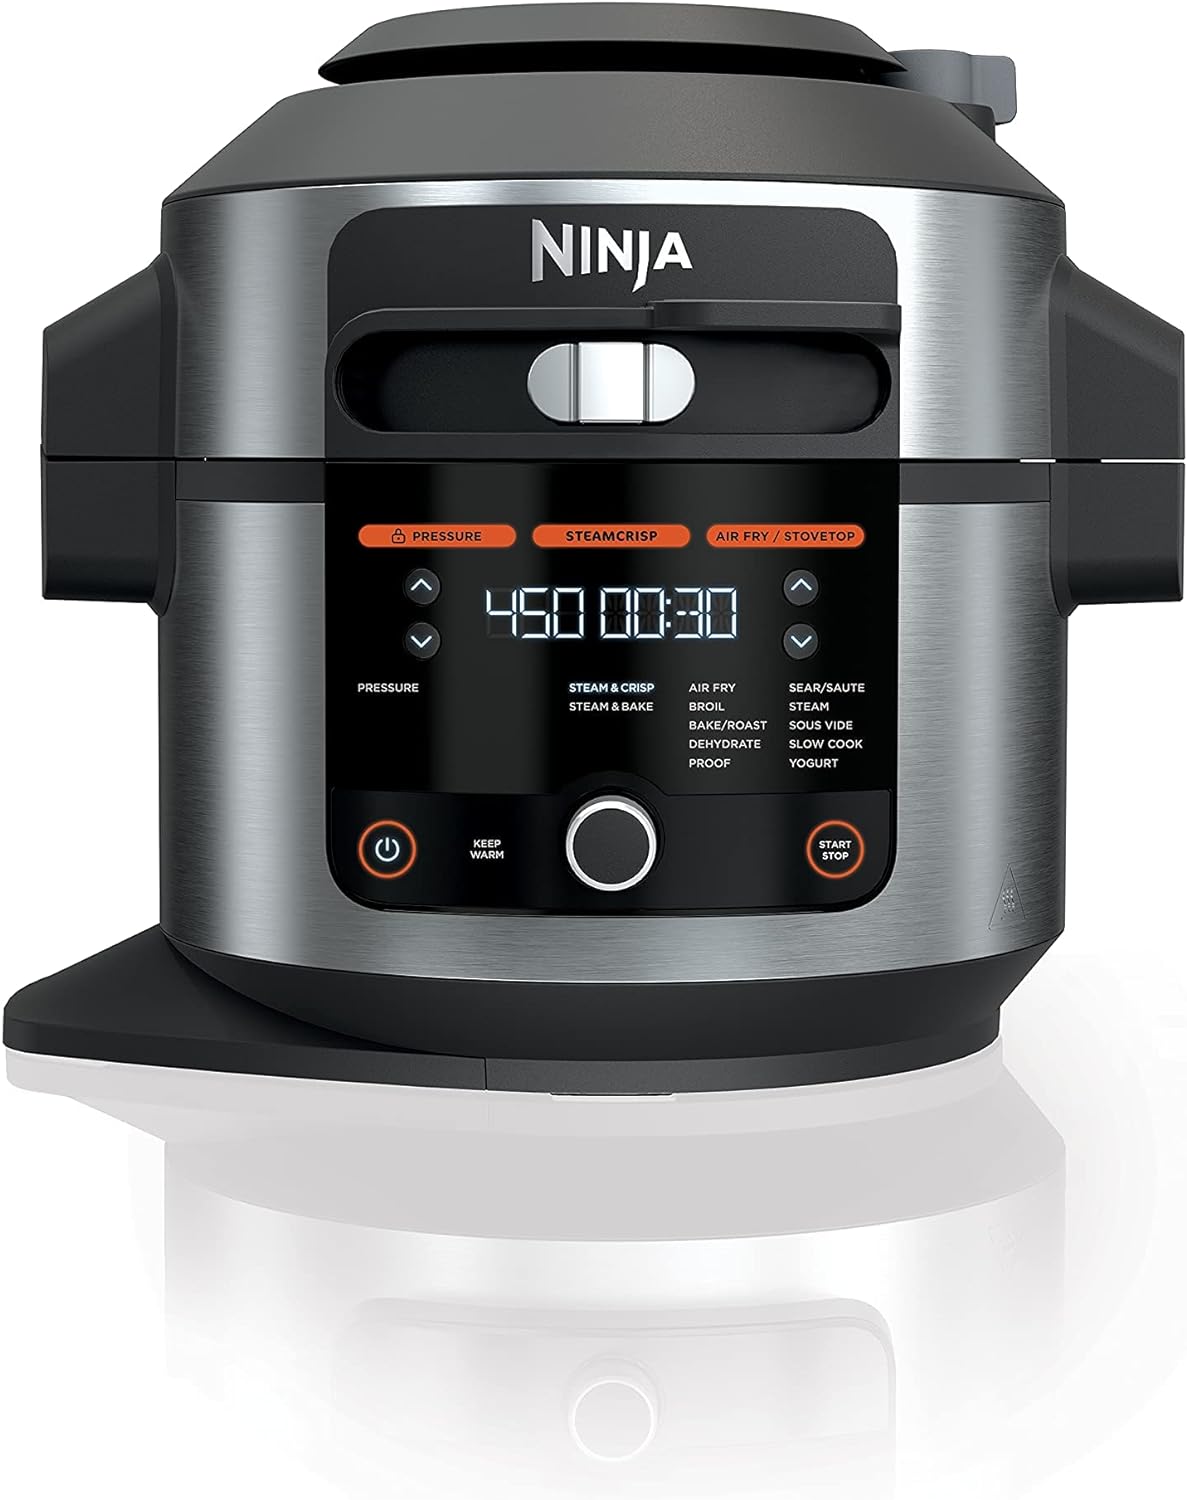 Ninja OL501 Foodi 6.5 Qt. Pressure Cooker Steam Fryer with SmartLid, 14-in-1 that Air Fries, Bakes  More, with 2-Layer Capacity  4.6 Qt. Crisp Plate, Silver/Black (Renewed)